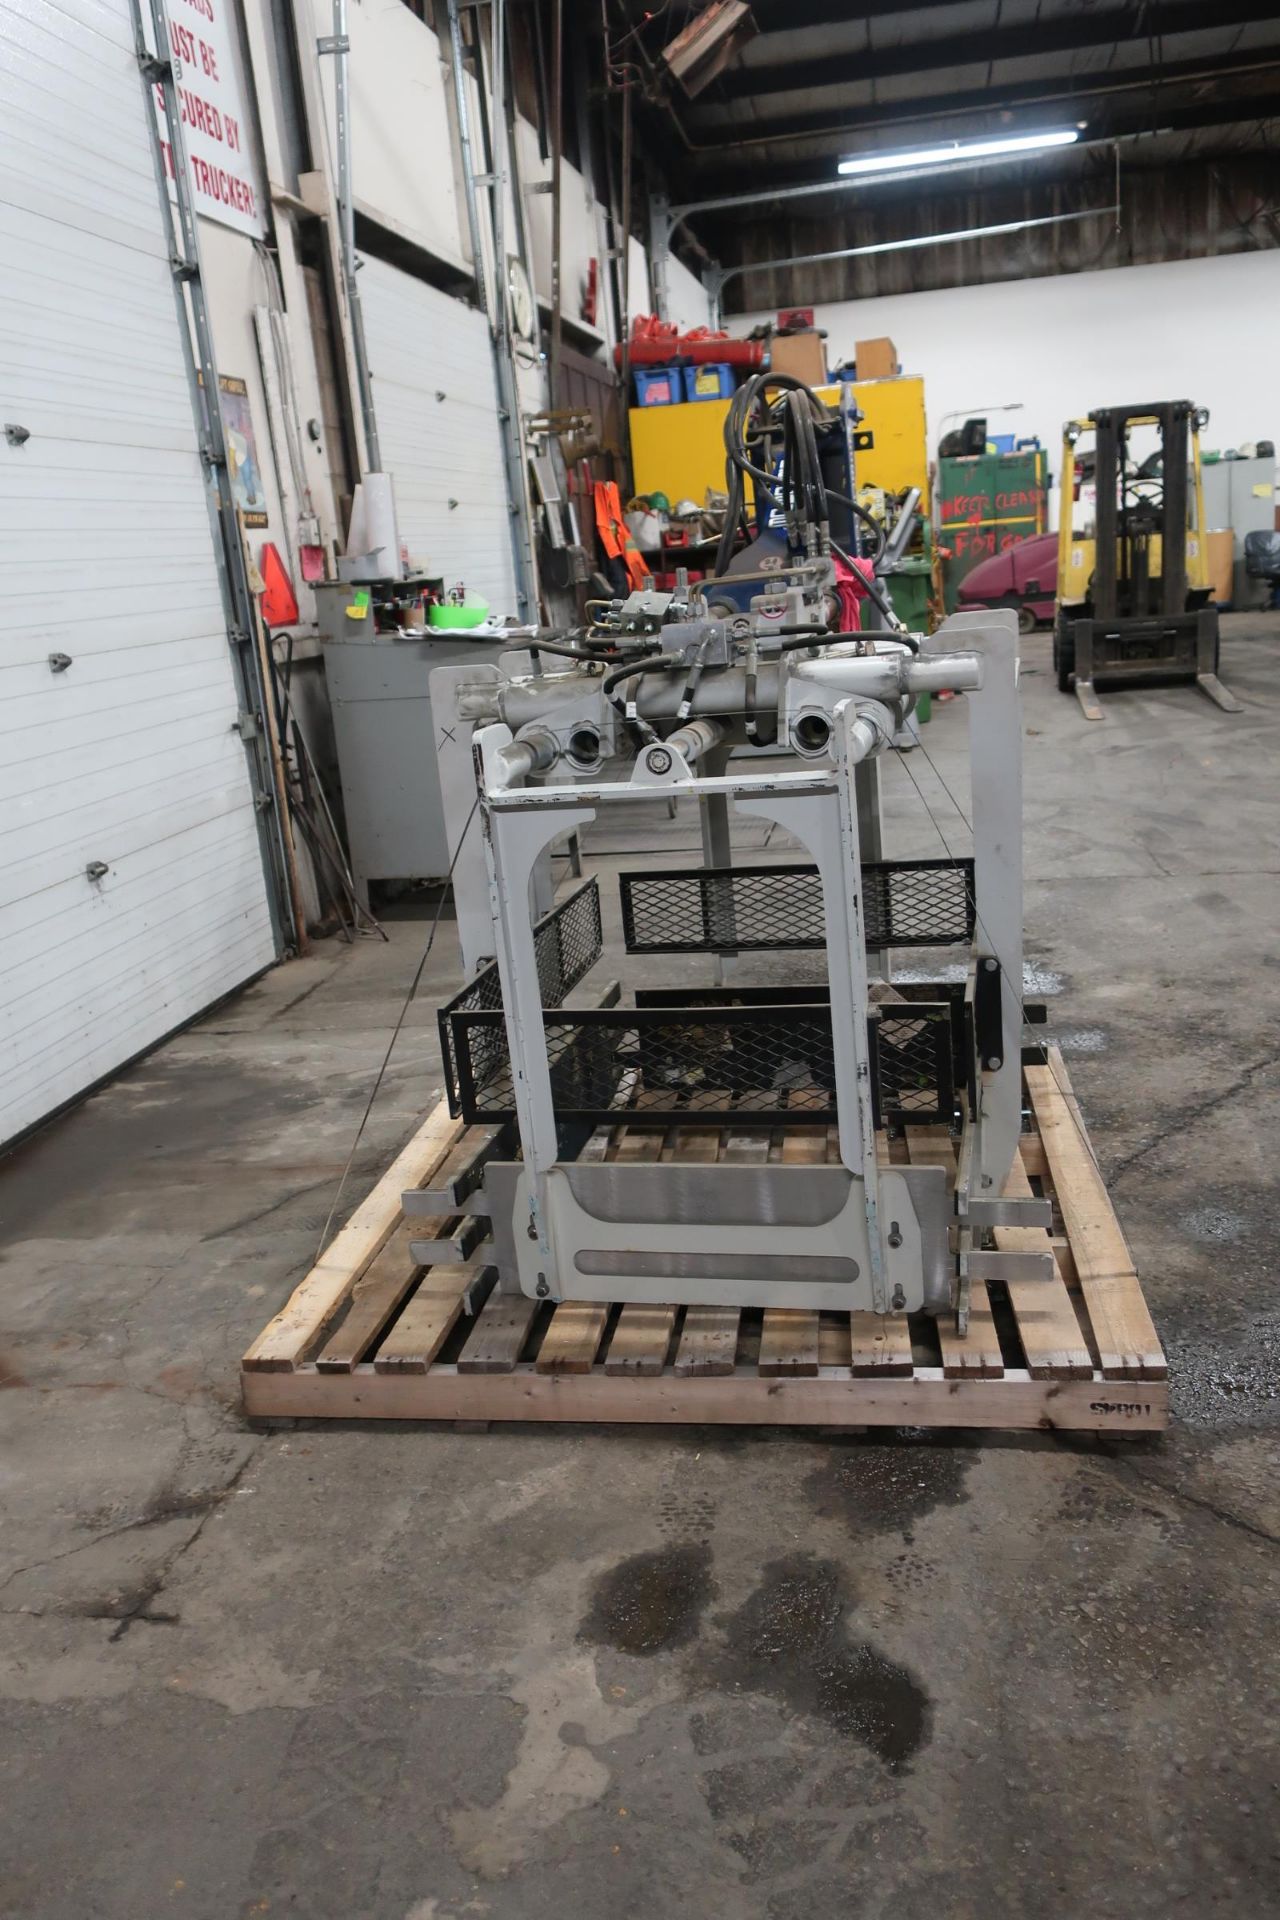 Cascade Box Picker Lifter Forklift Attachment - Mint condition over $60,000 retail cost - Image 4 of 4